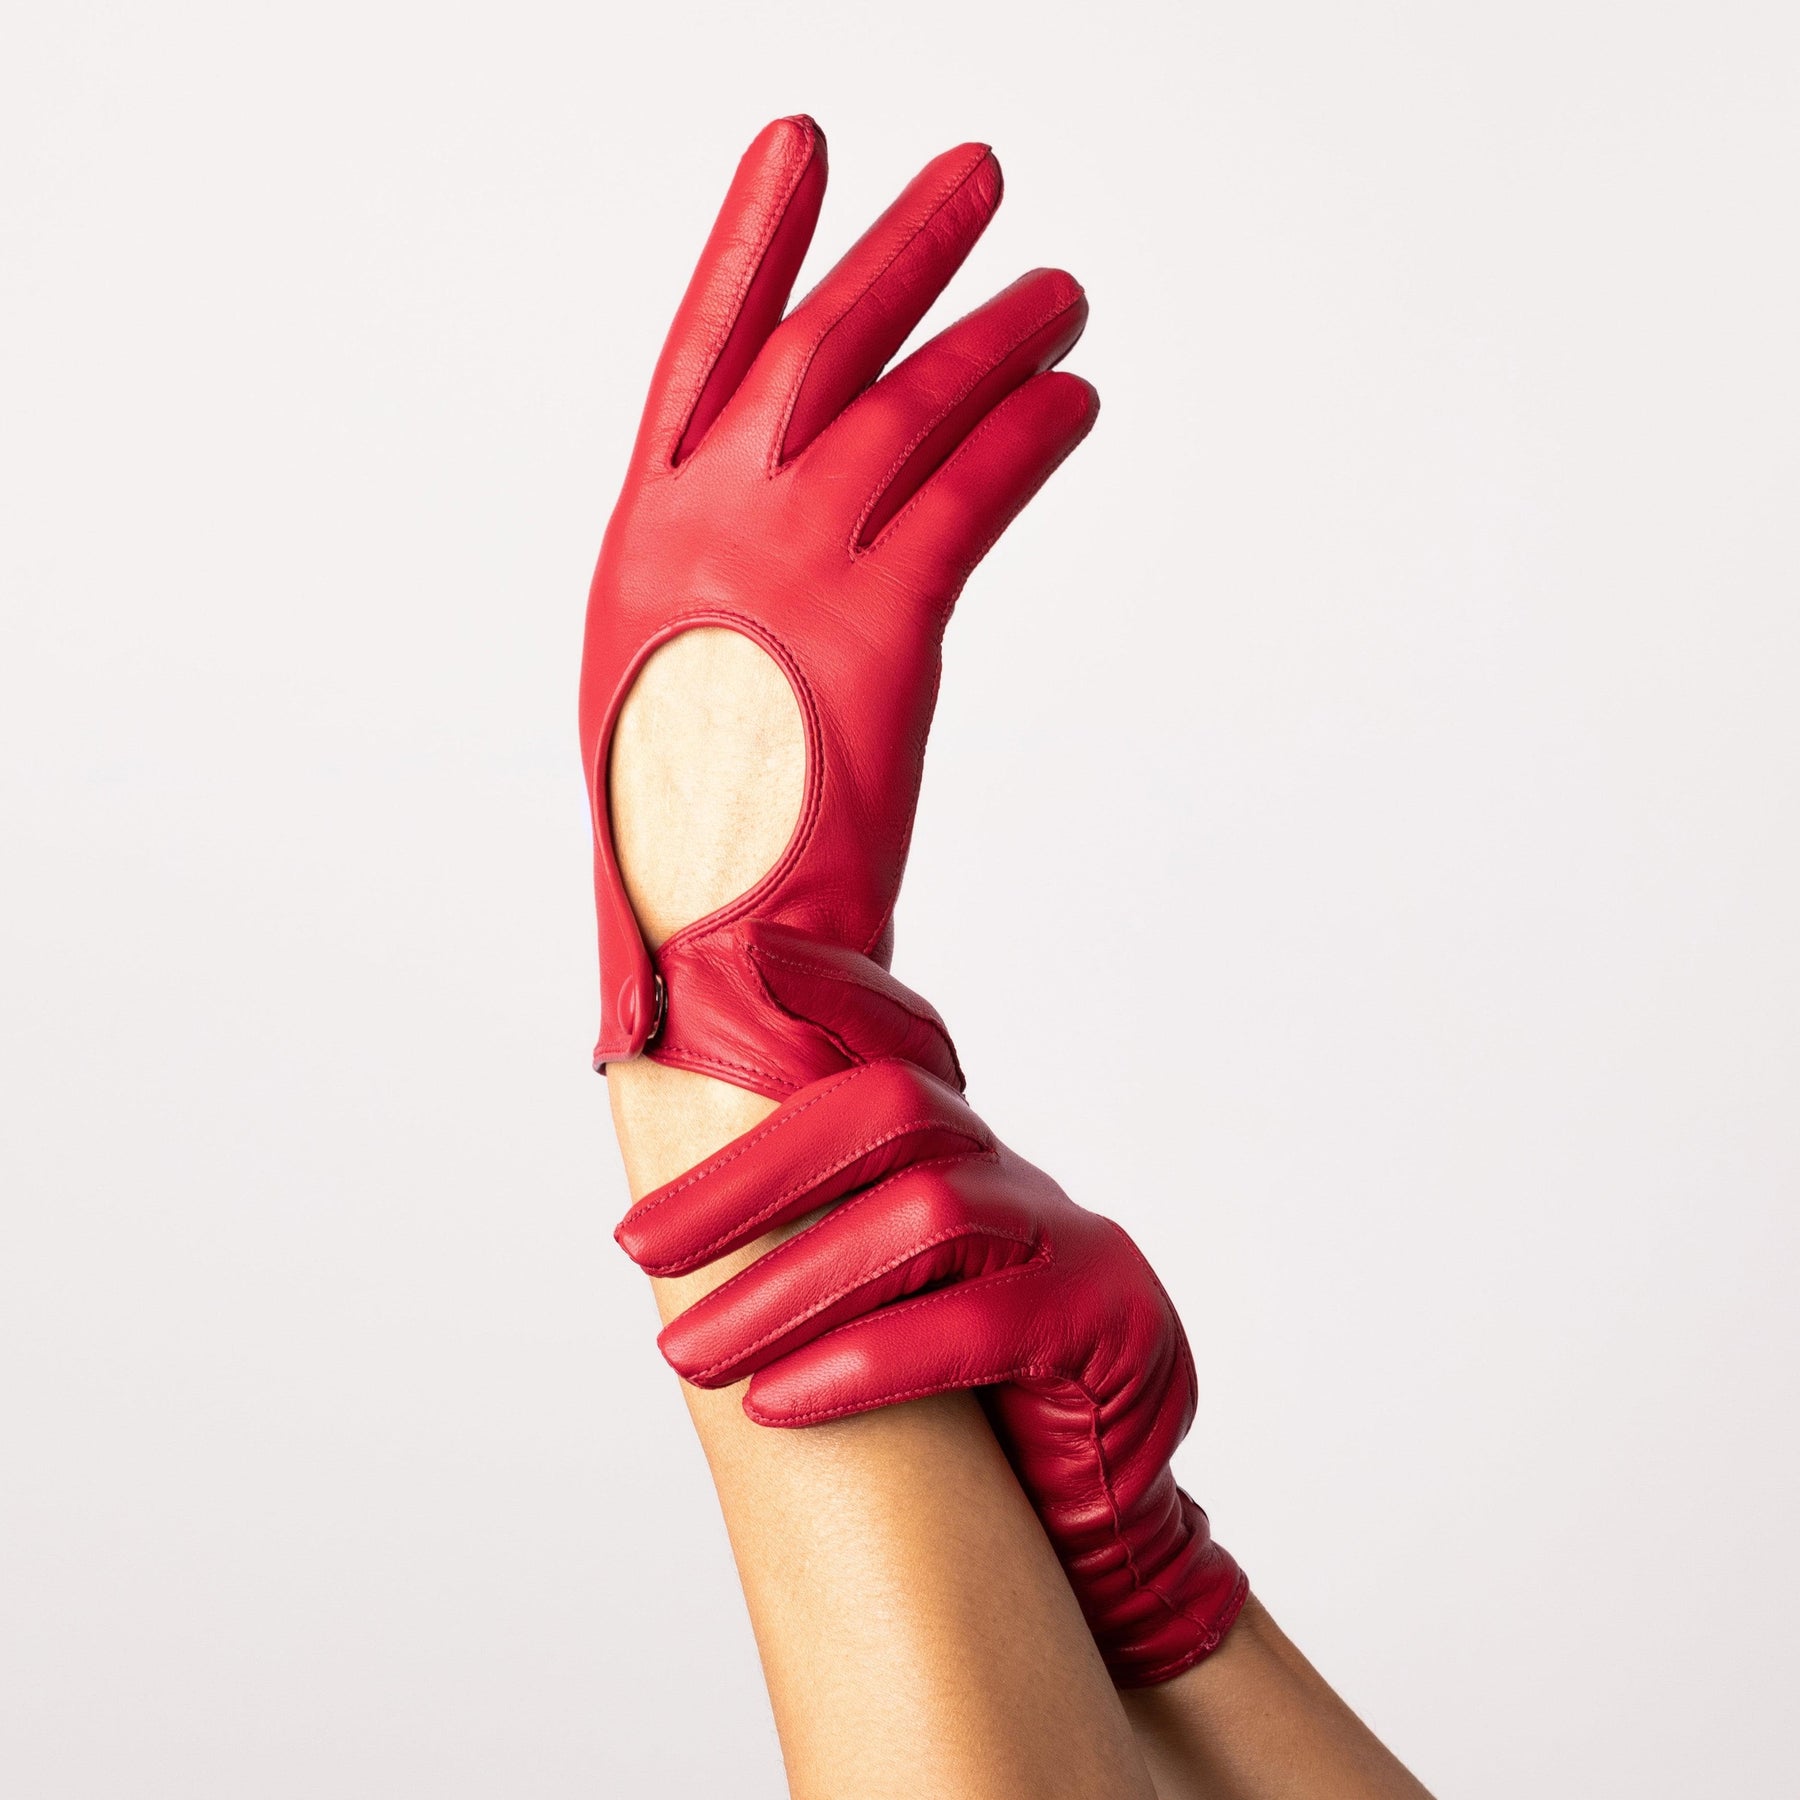 Original Driver Glove, red leather driving gloves.